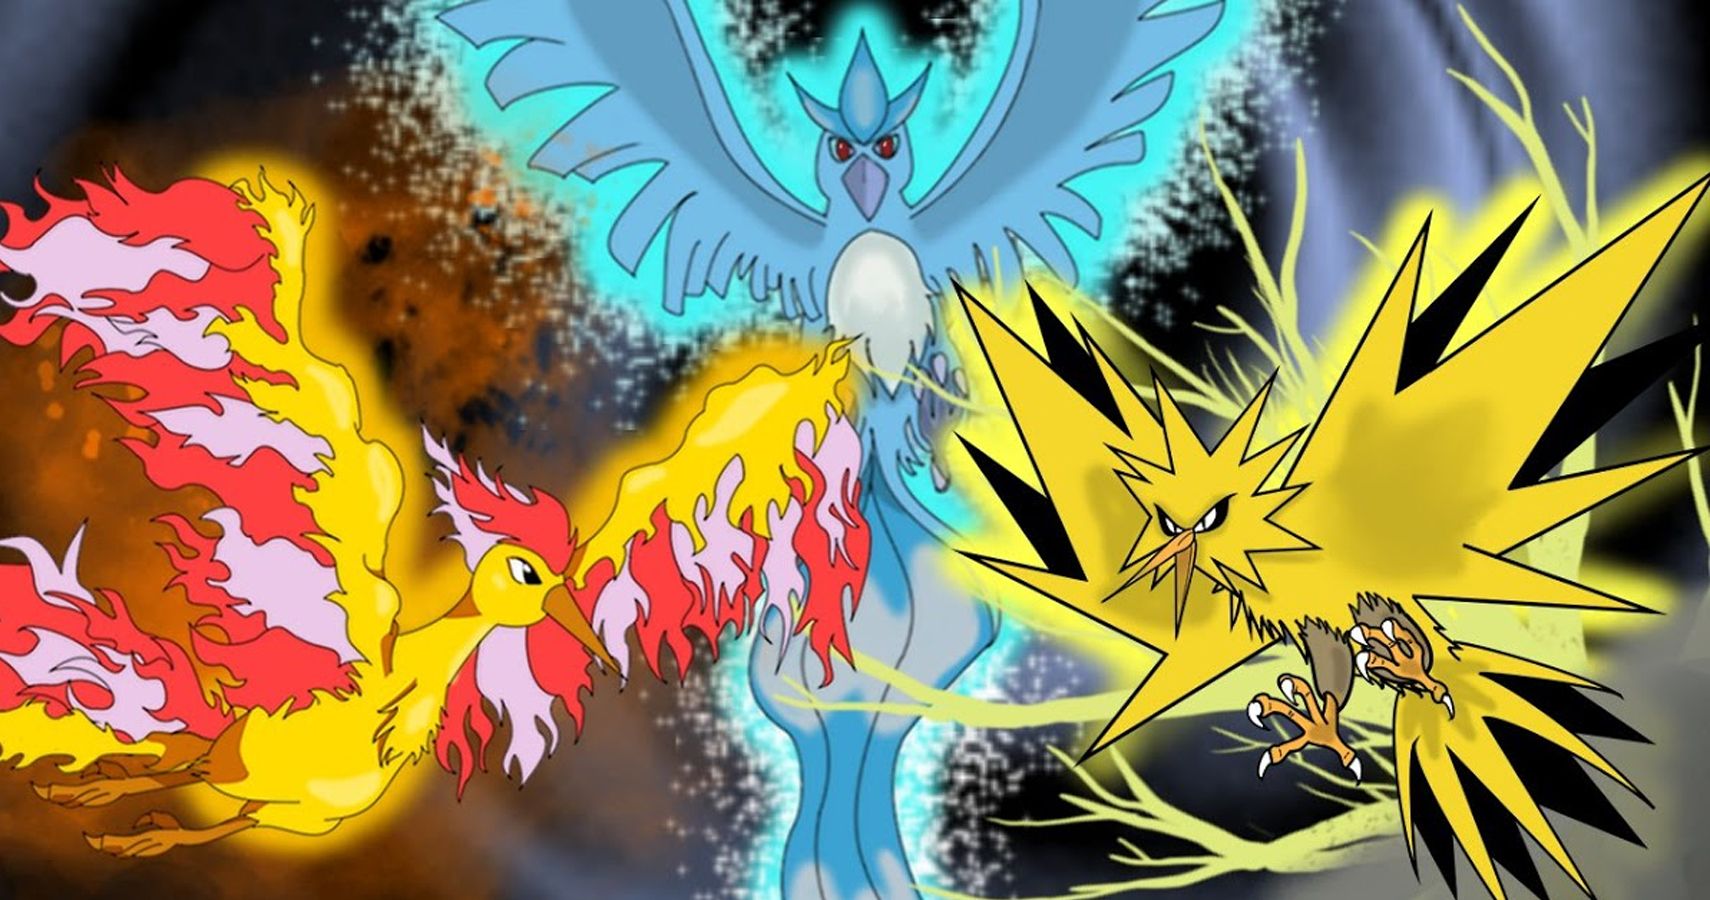 18 Shocking Facts About Zapdos